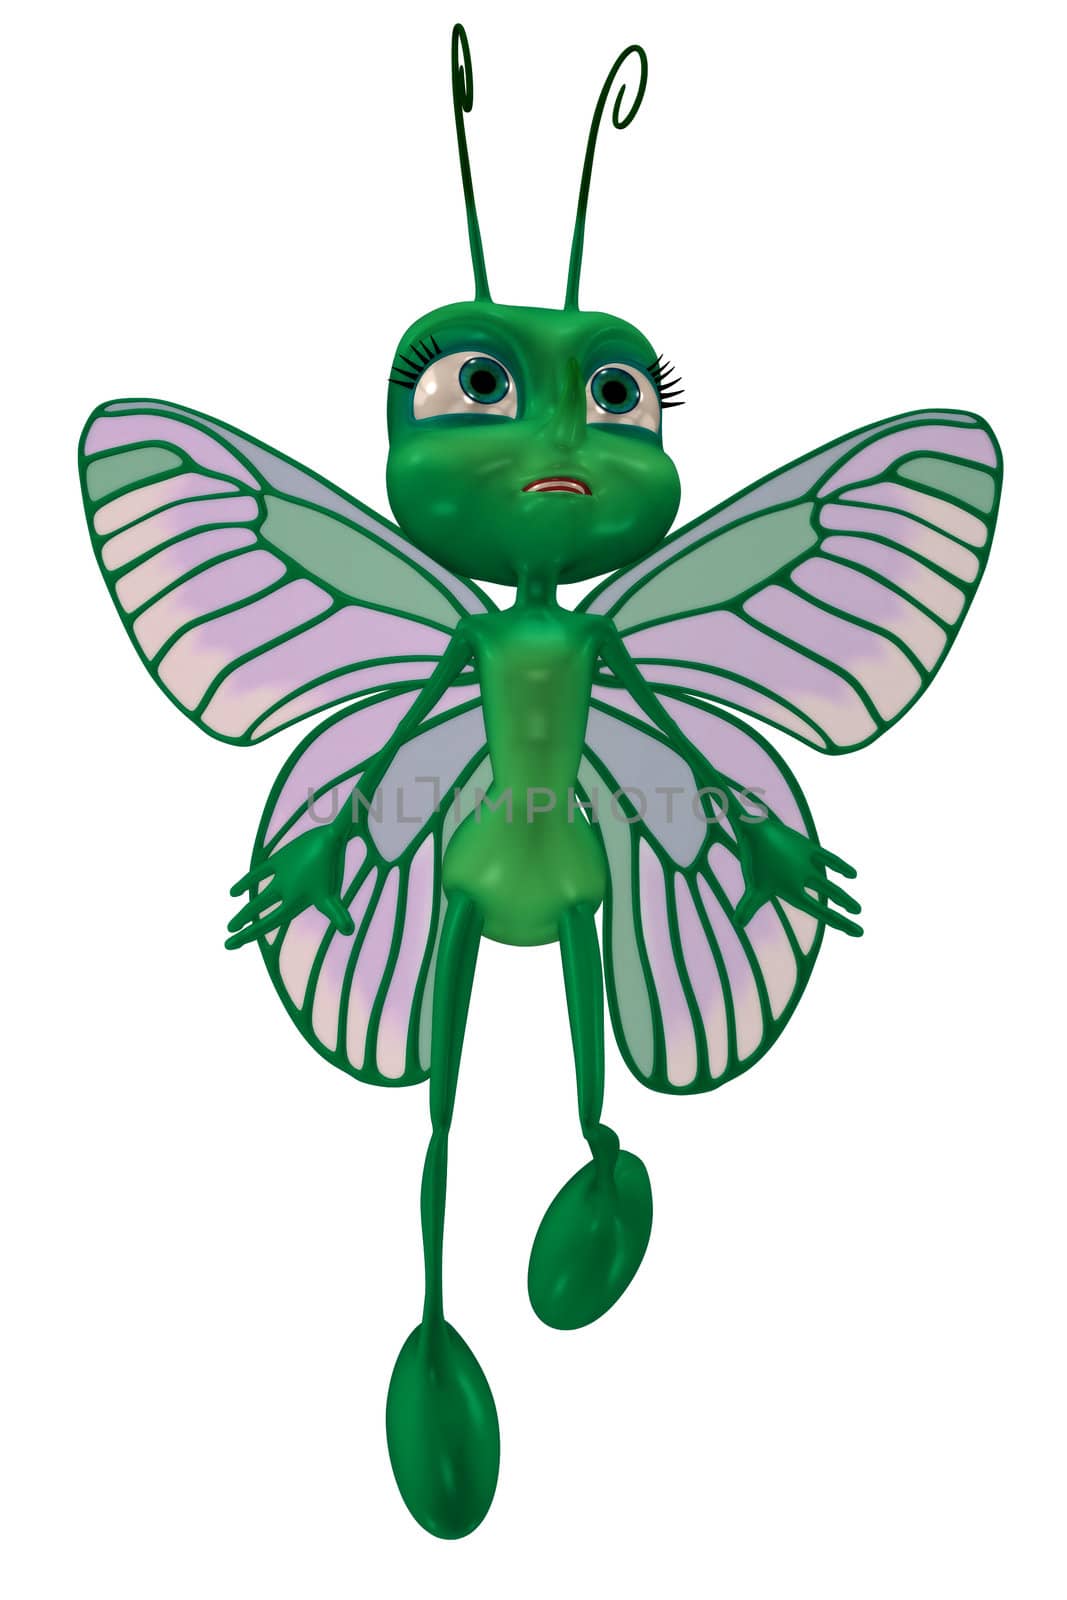 a green cartoon fly - isolated on white